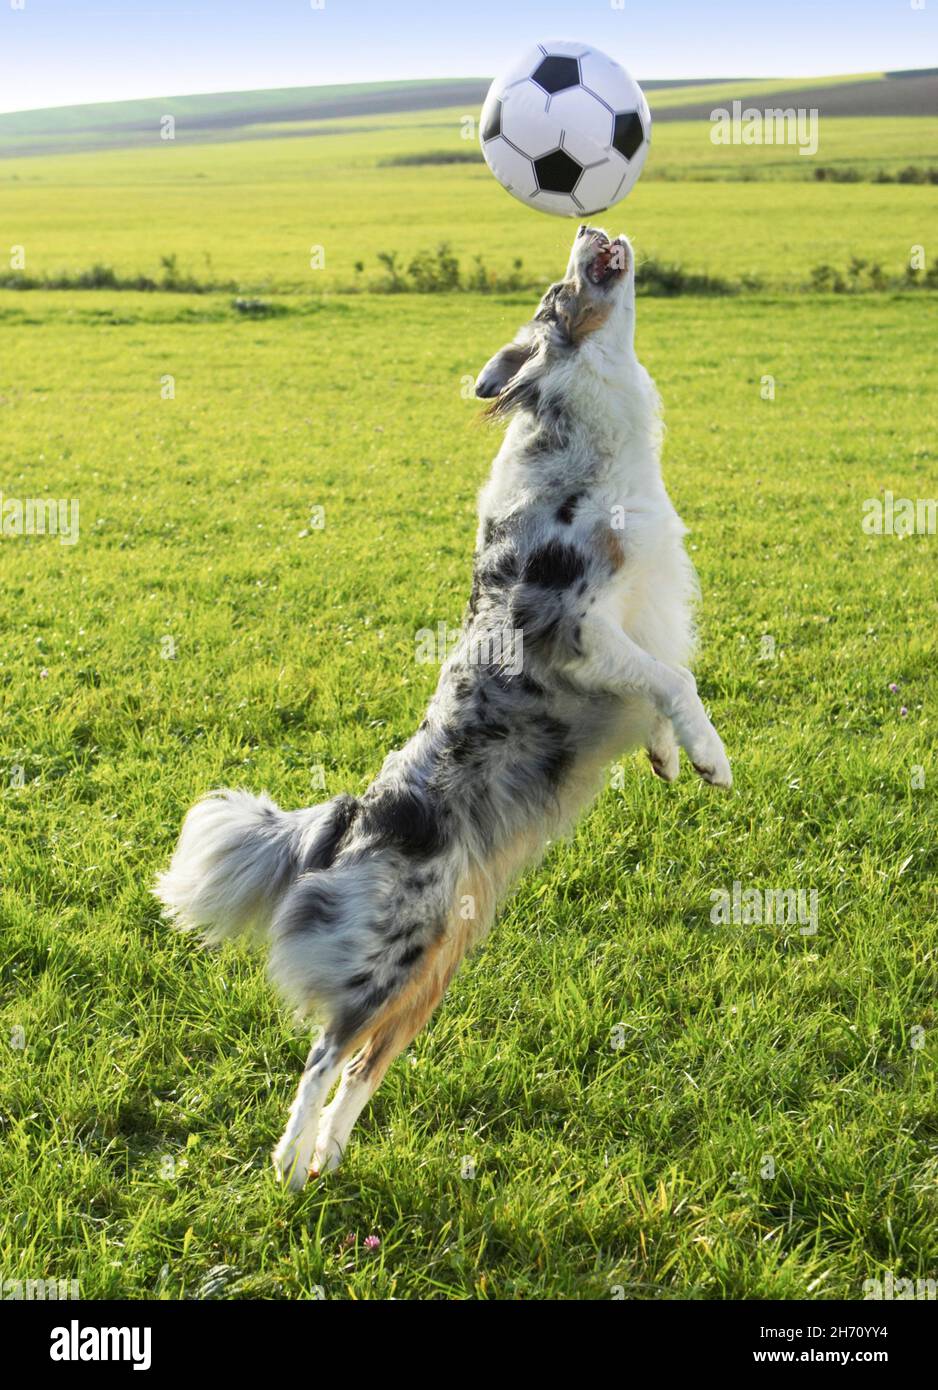 Australian Shepherd. Adult dog on a meadow, playing with a ball. Germany Stock Photo